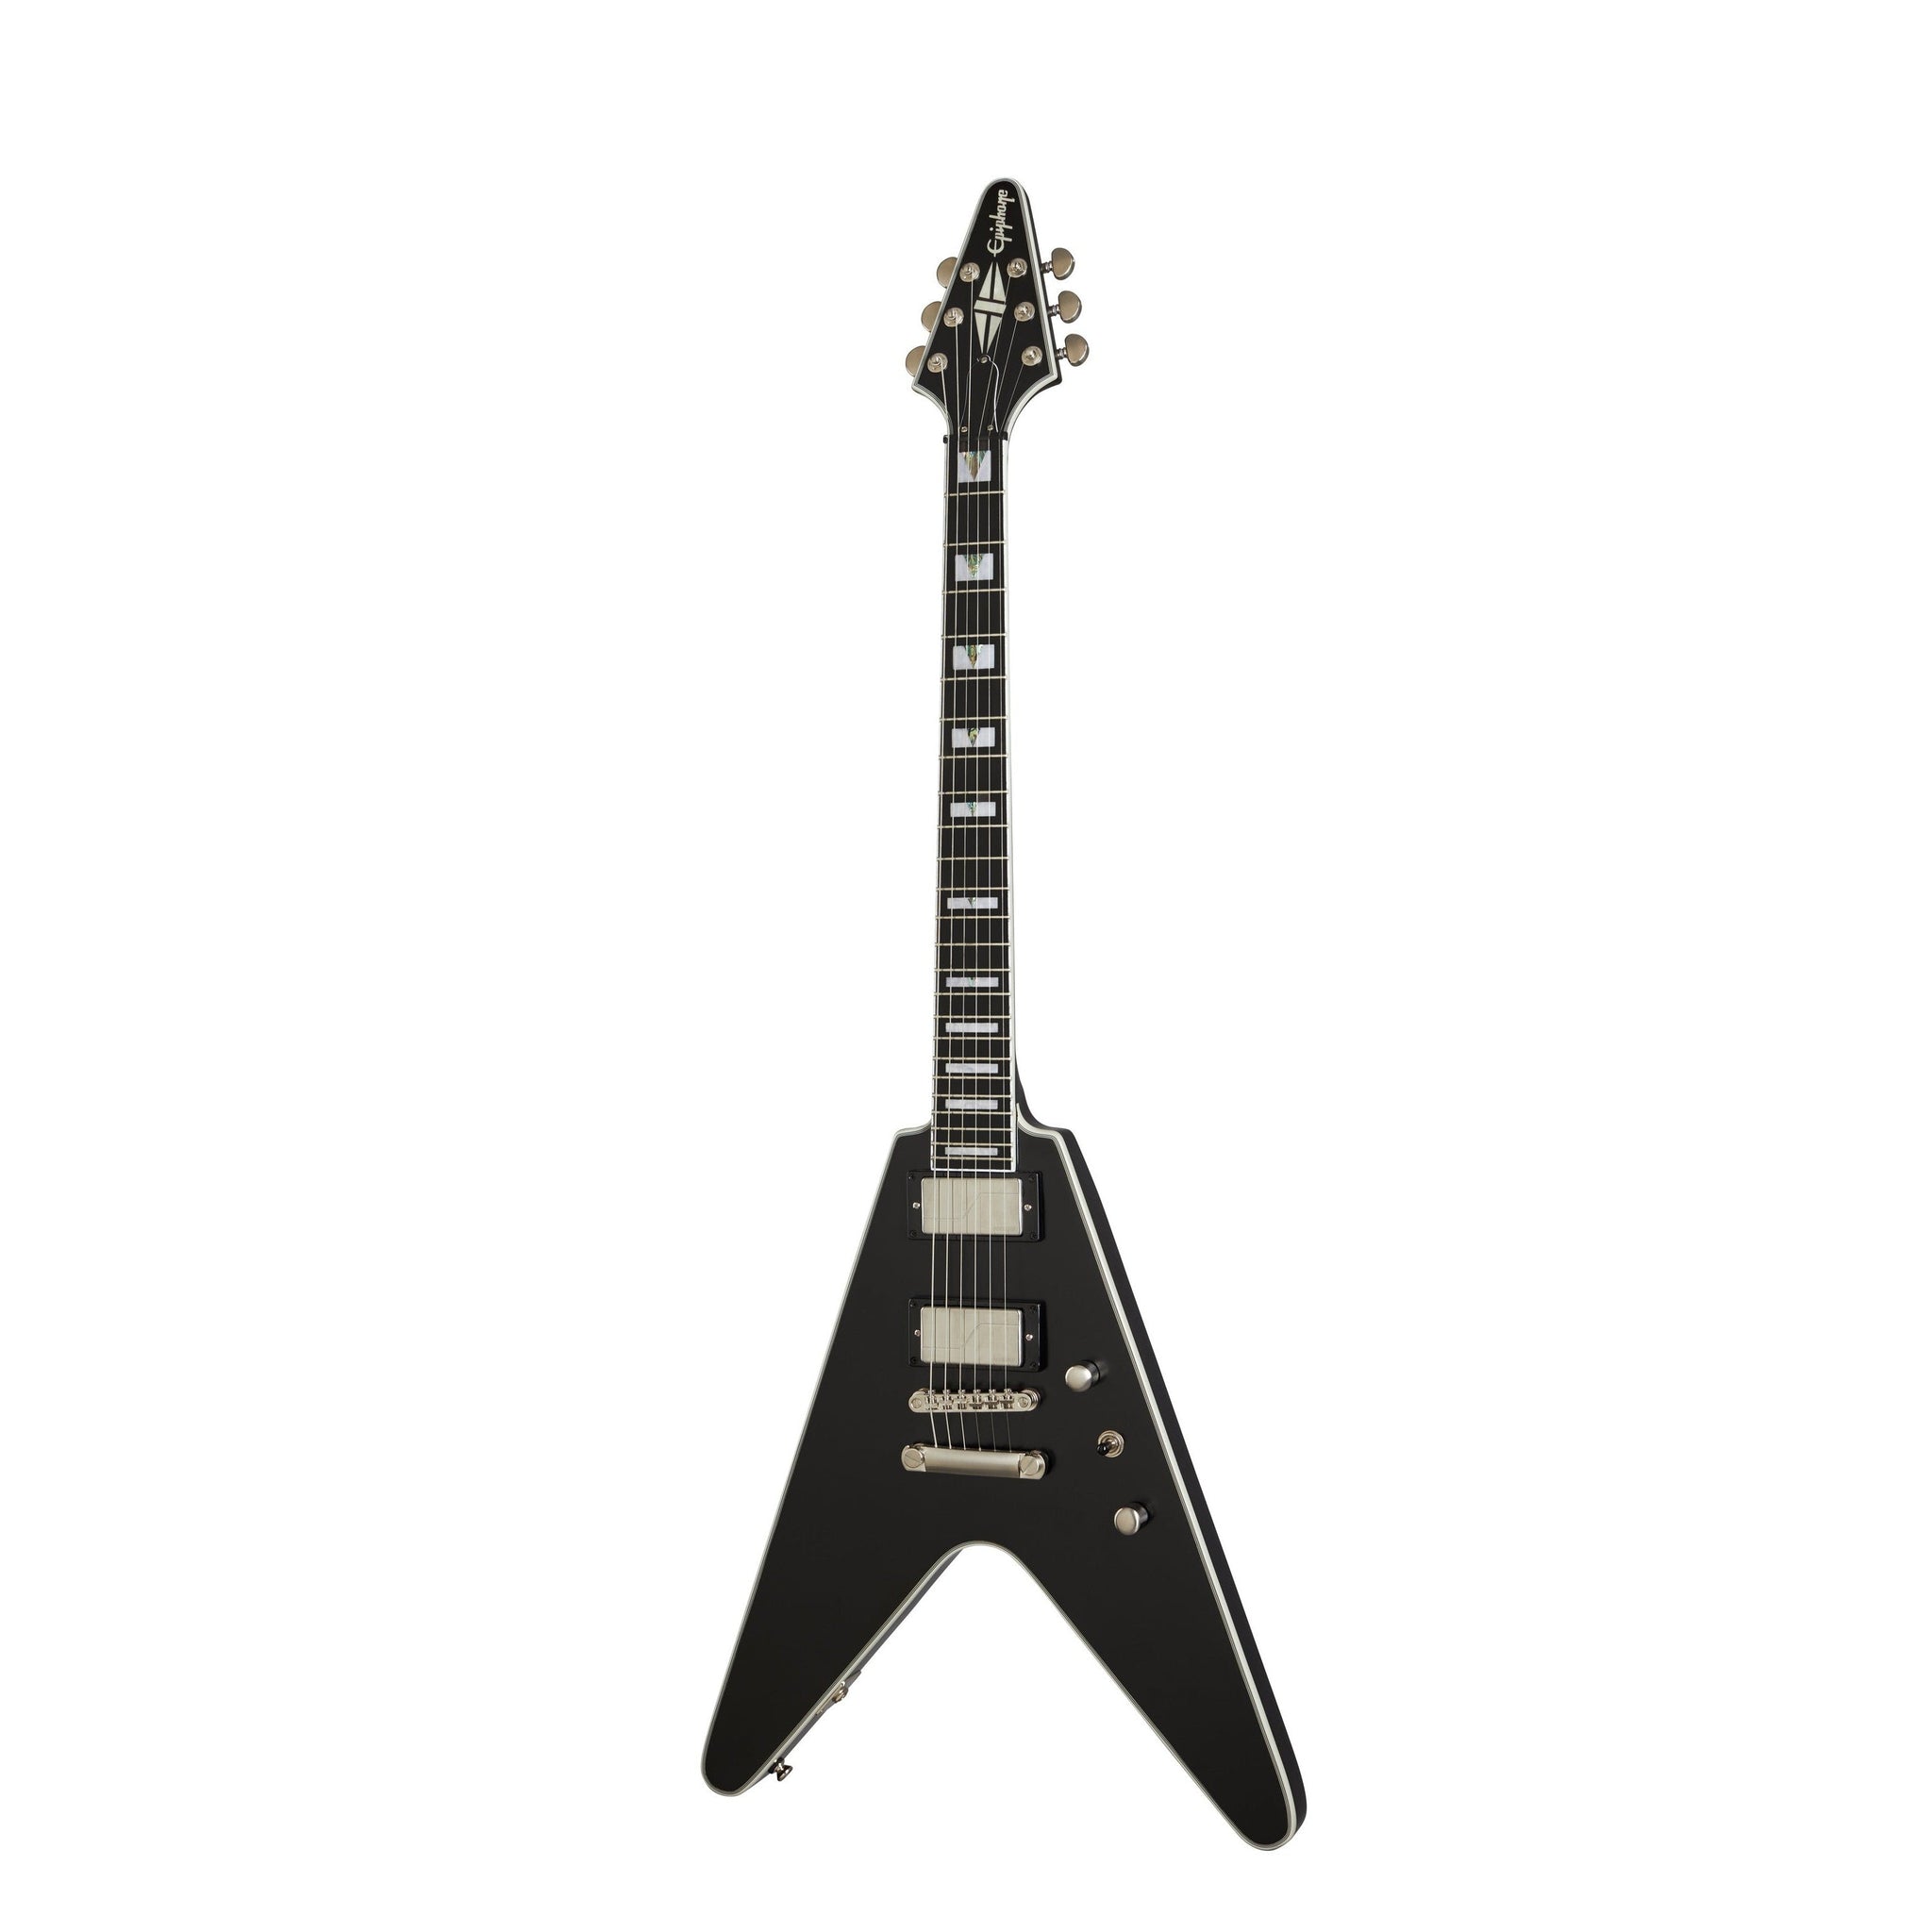 Epiphone EIVYBAGNH Flying V Prophecy Electric Guitar-Black Aged Gloss-Music World Academy